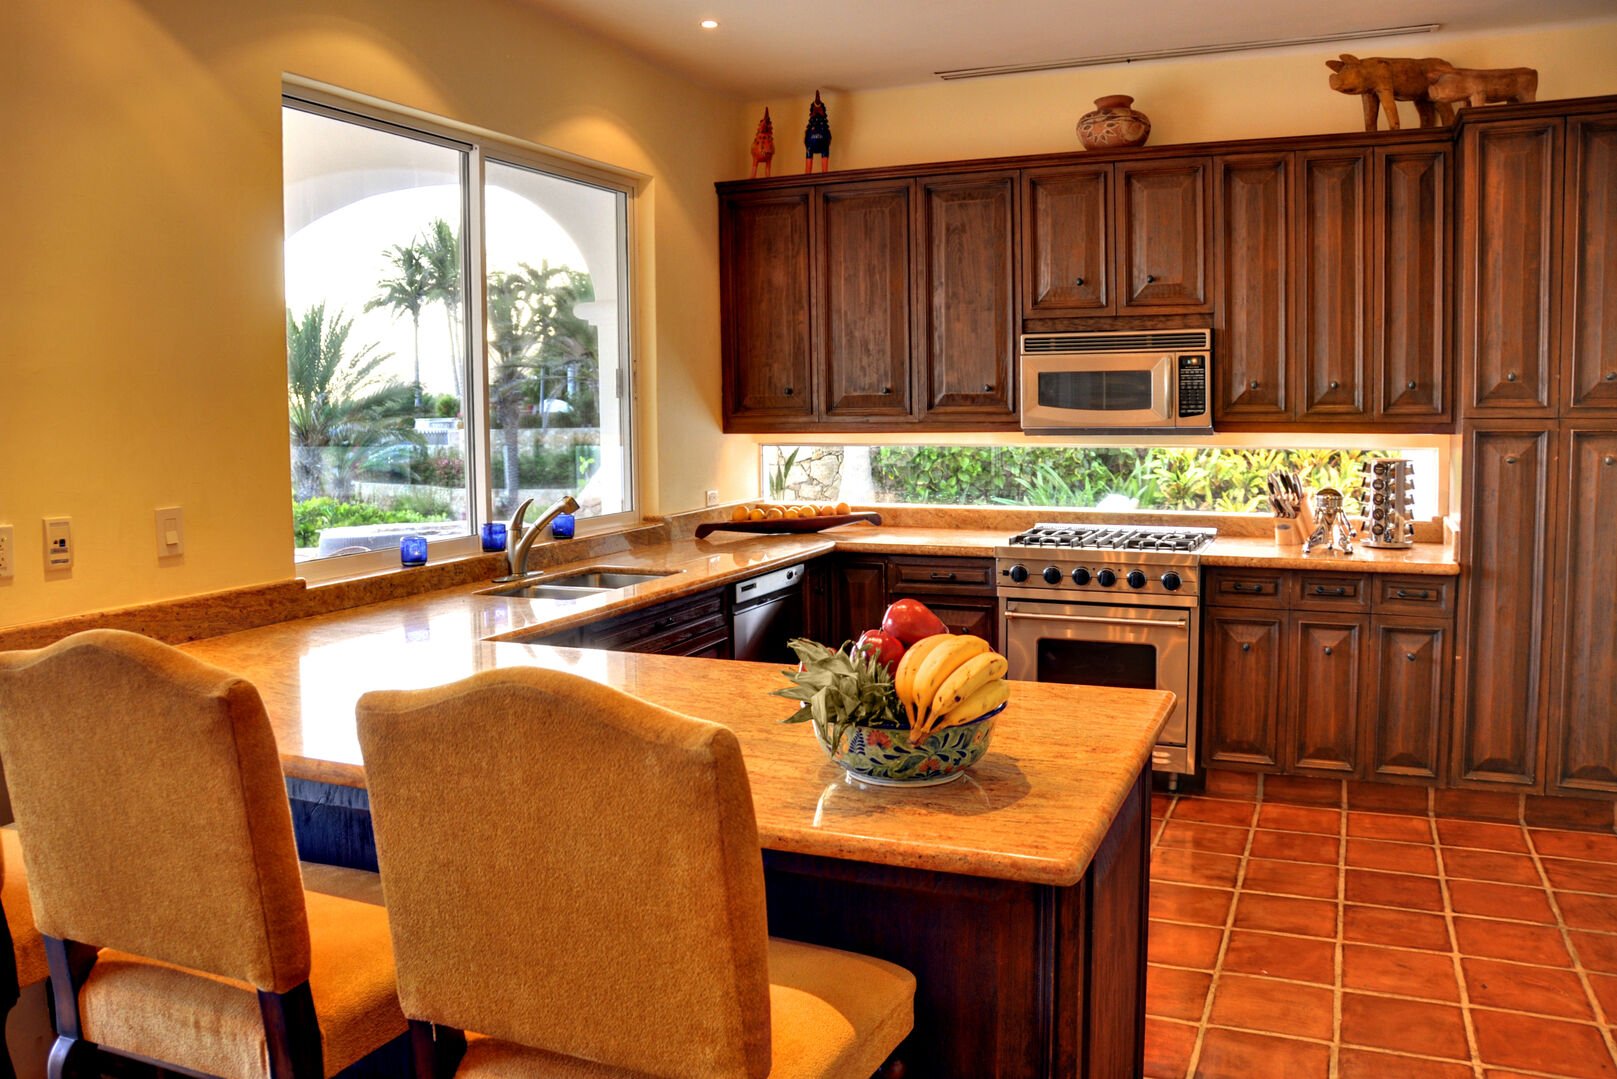 Fully Equipped Kitchen with Breakfast Bar Seating